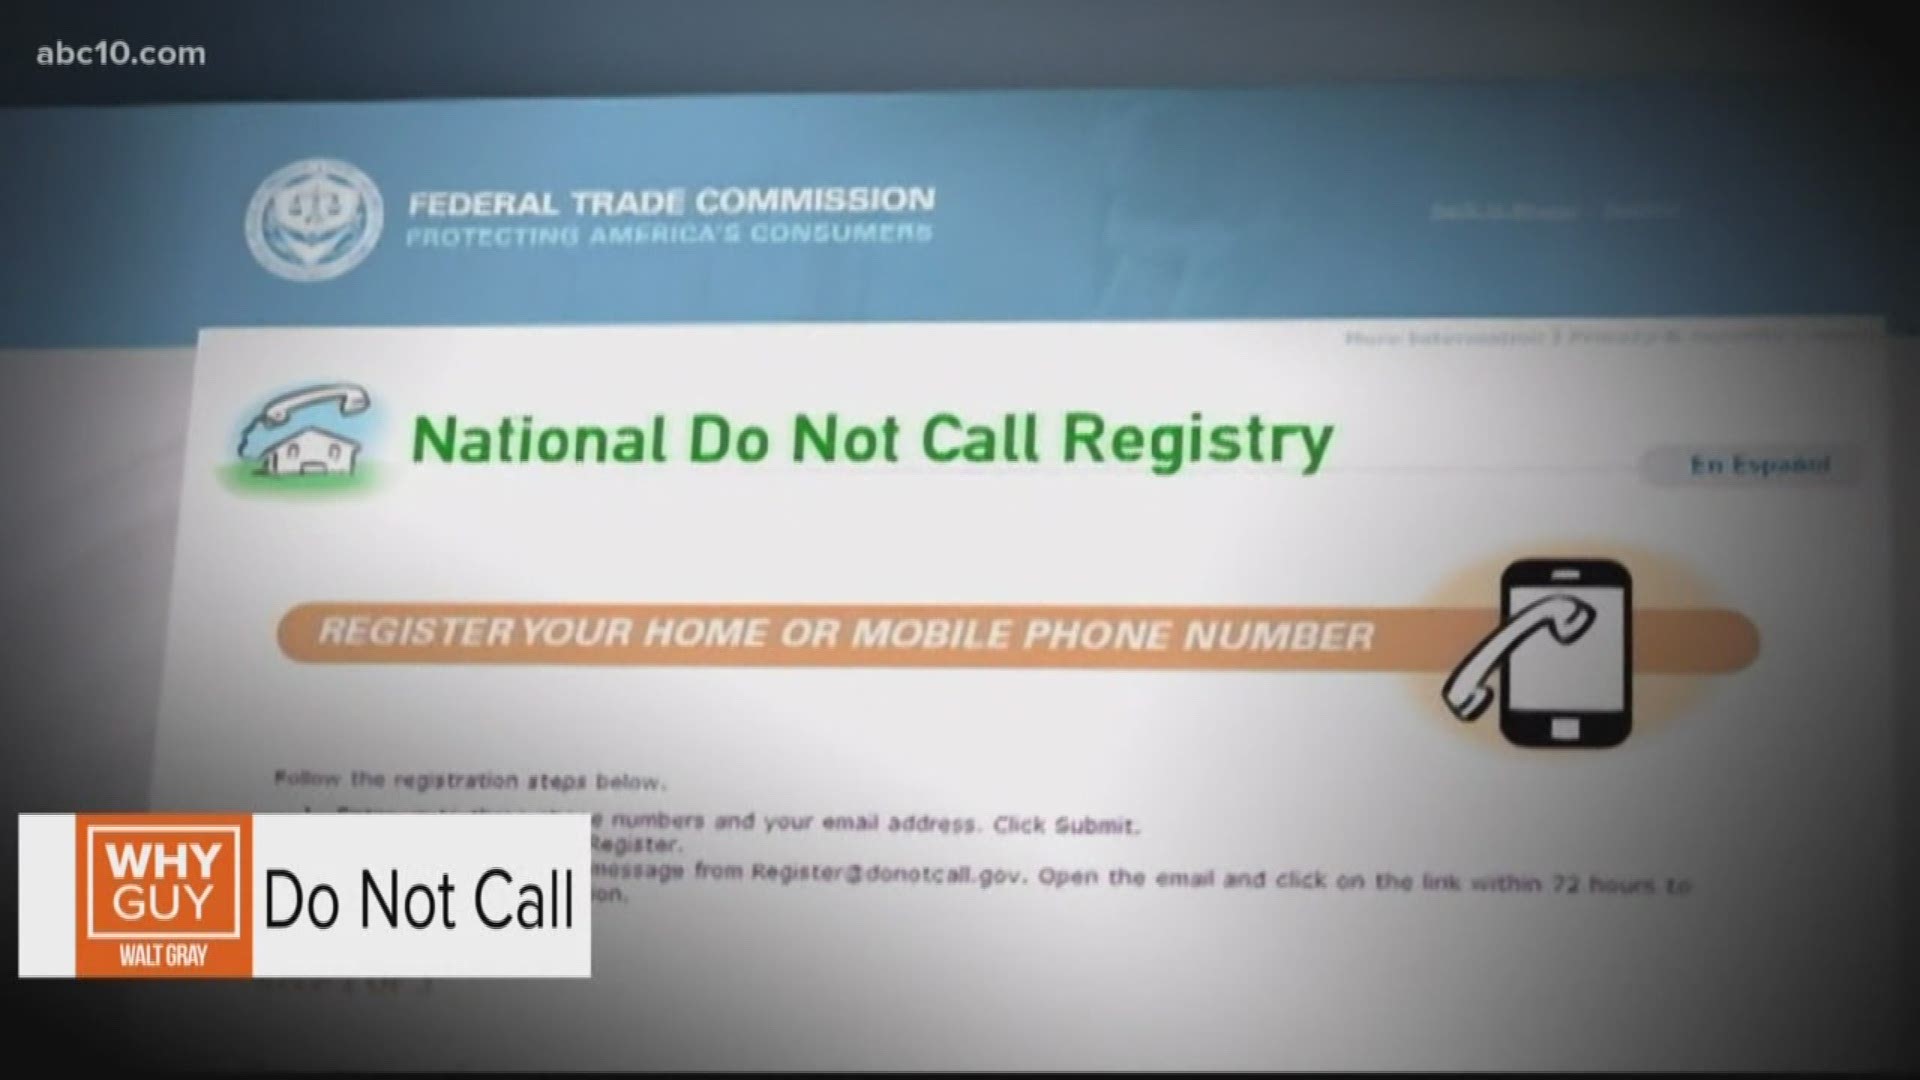 Still getting robocalls even though you're on the "do not call" list? You're not alone. Now Walts answers why that's still happening to many of us.